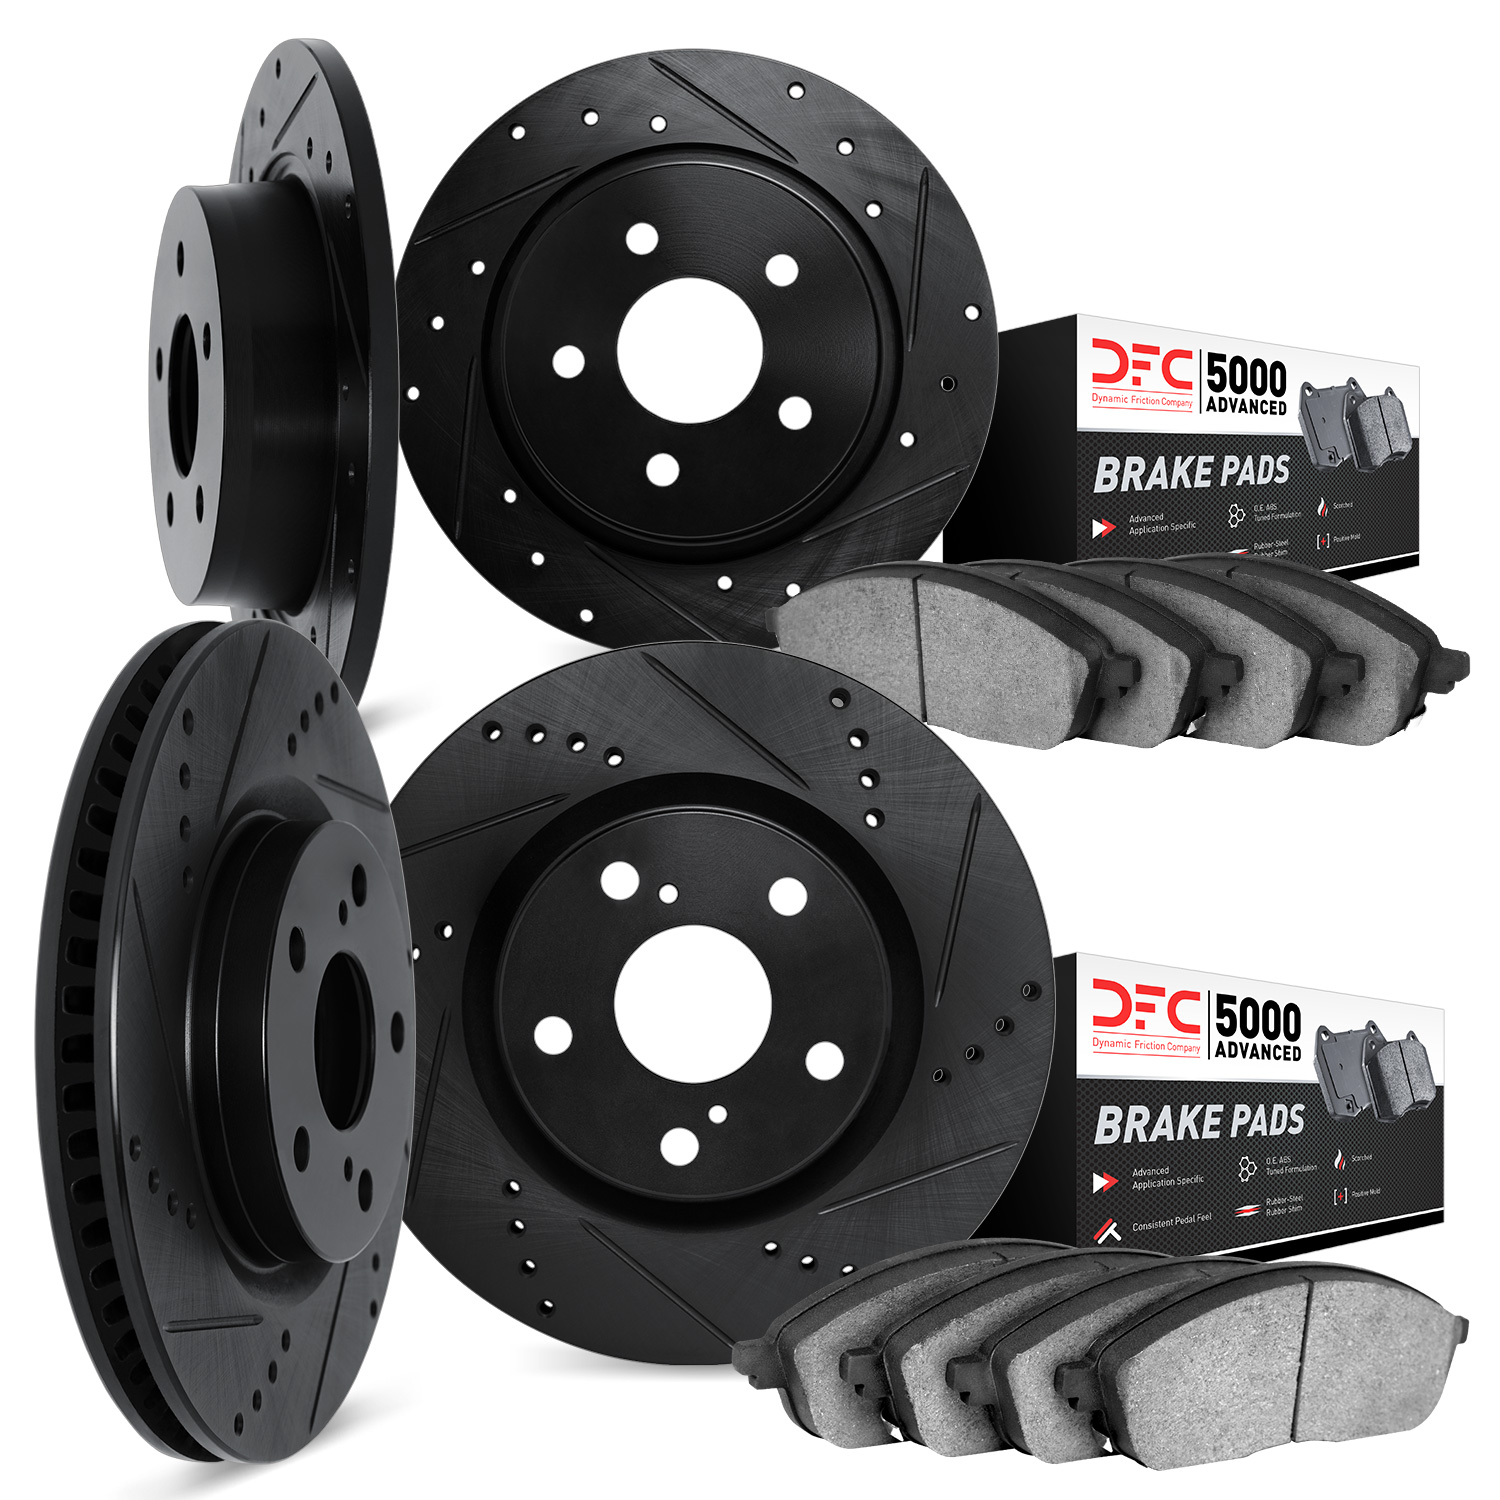 8504-59053 Drilled/Slotted Brake Rotors w/5000 Advanced Brake Pads Kit [Black], Fits Select Acura/Honda, Position: Front and Rea